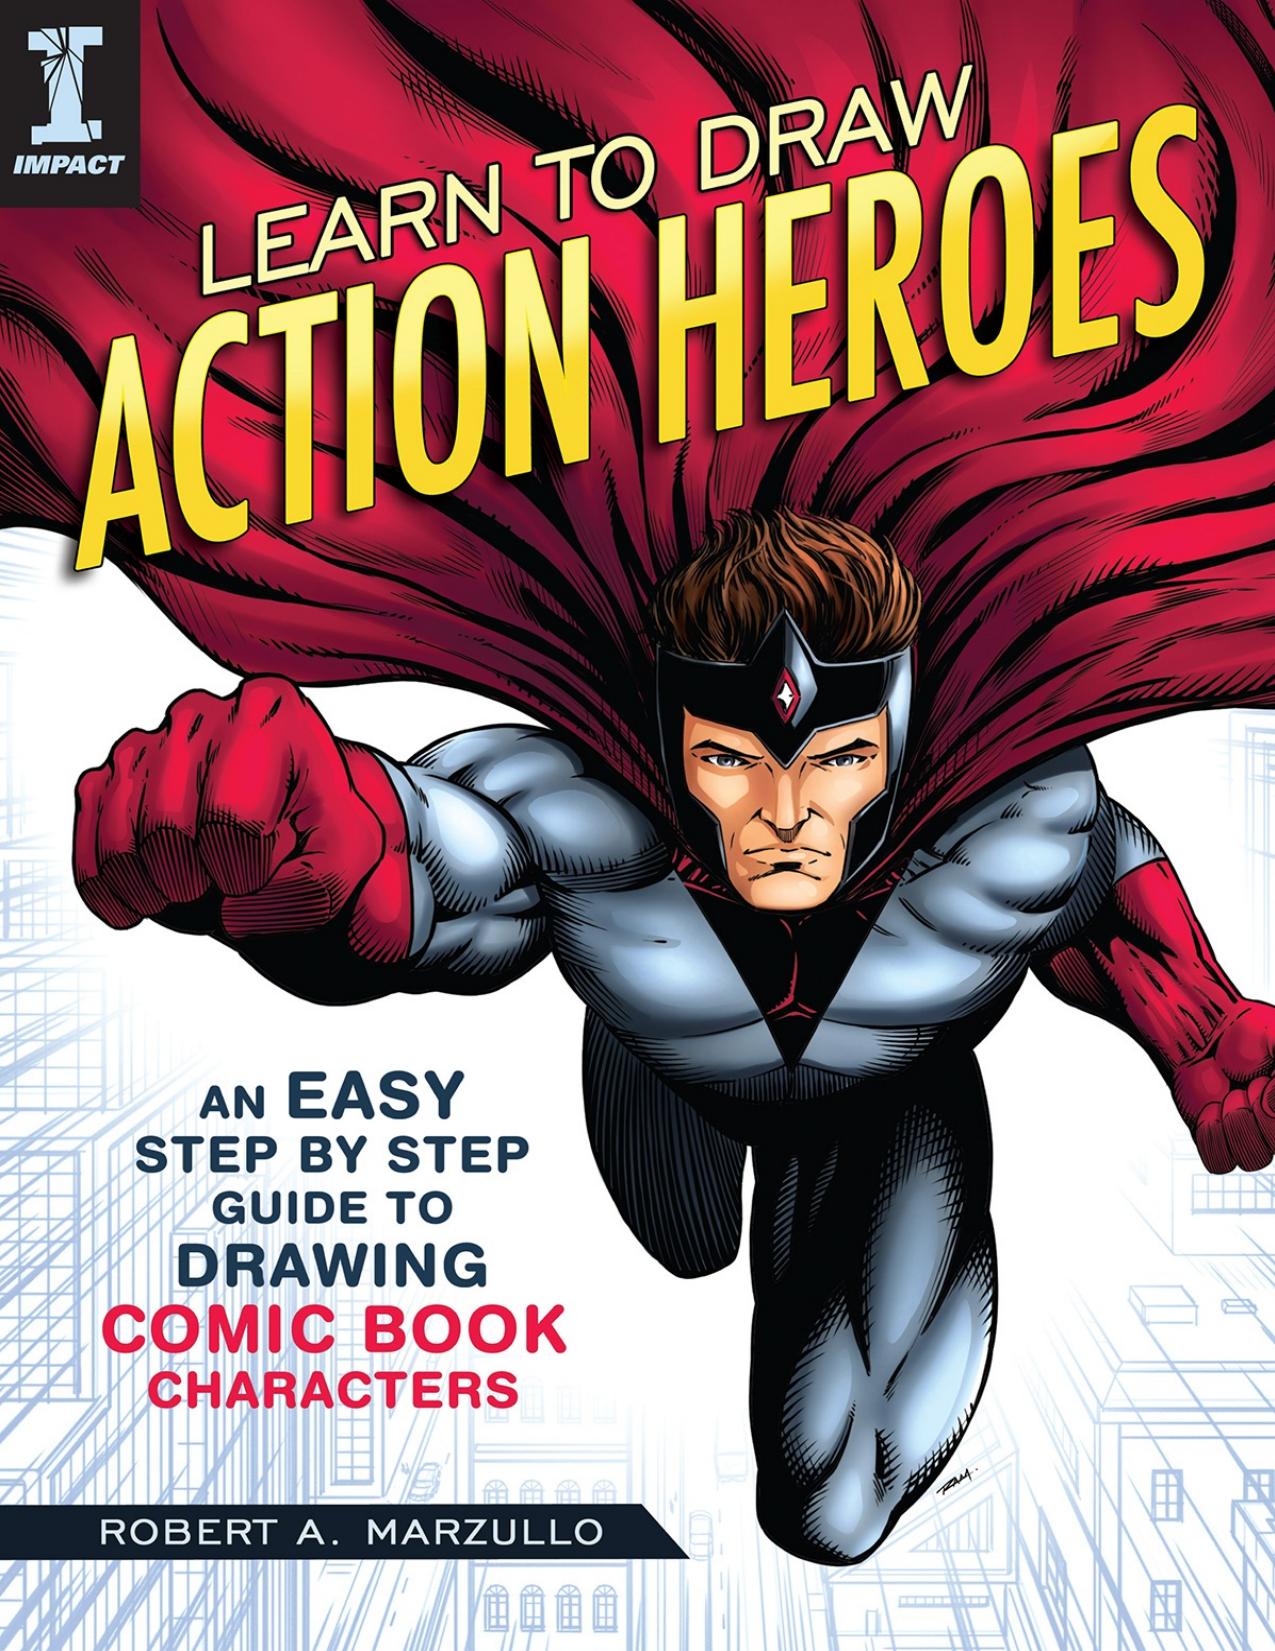 Learn to Draw Action Heroes: An Easy Step by Step Guide to Drawing Comic Book Characters - PDFDrive.com